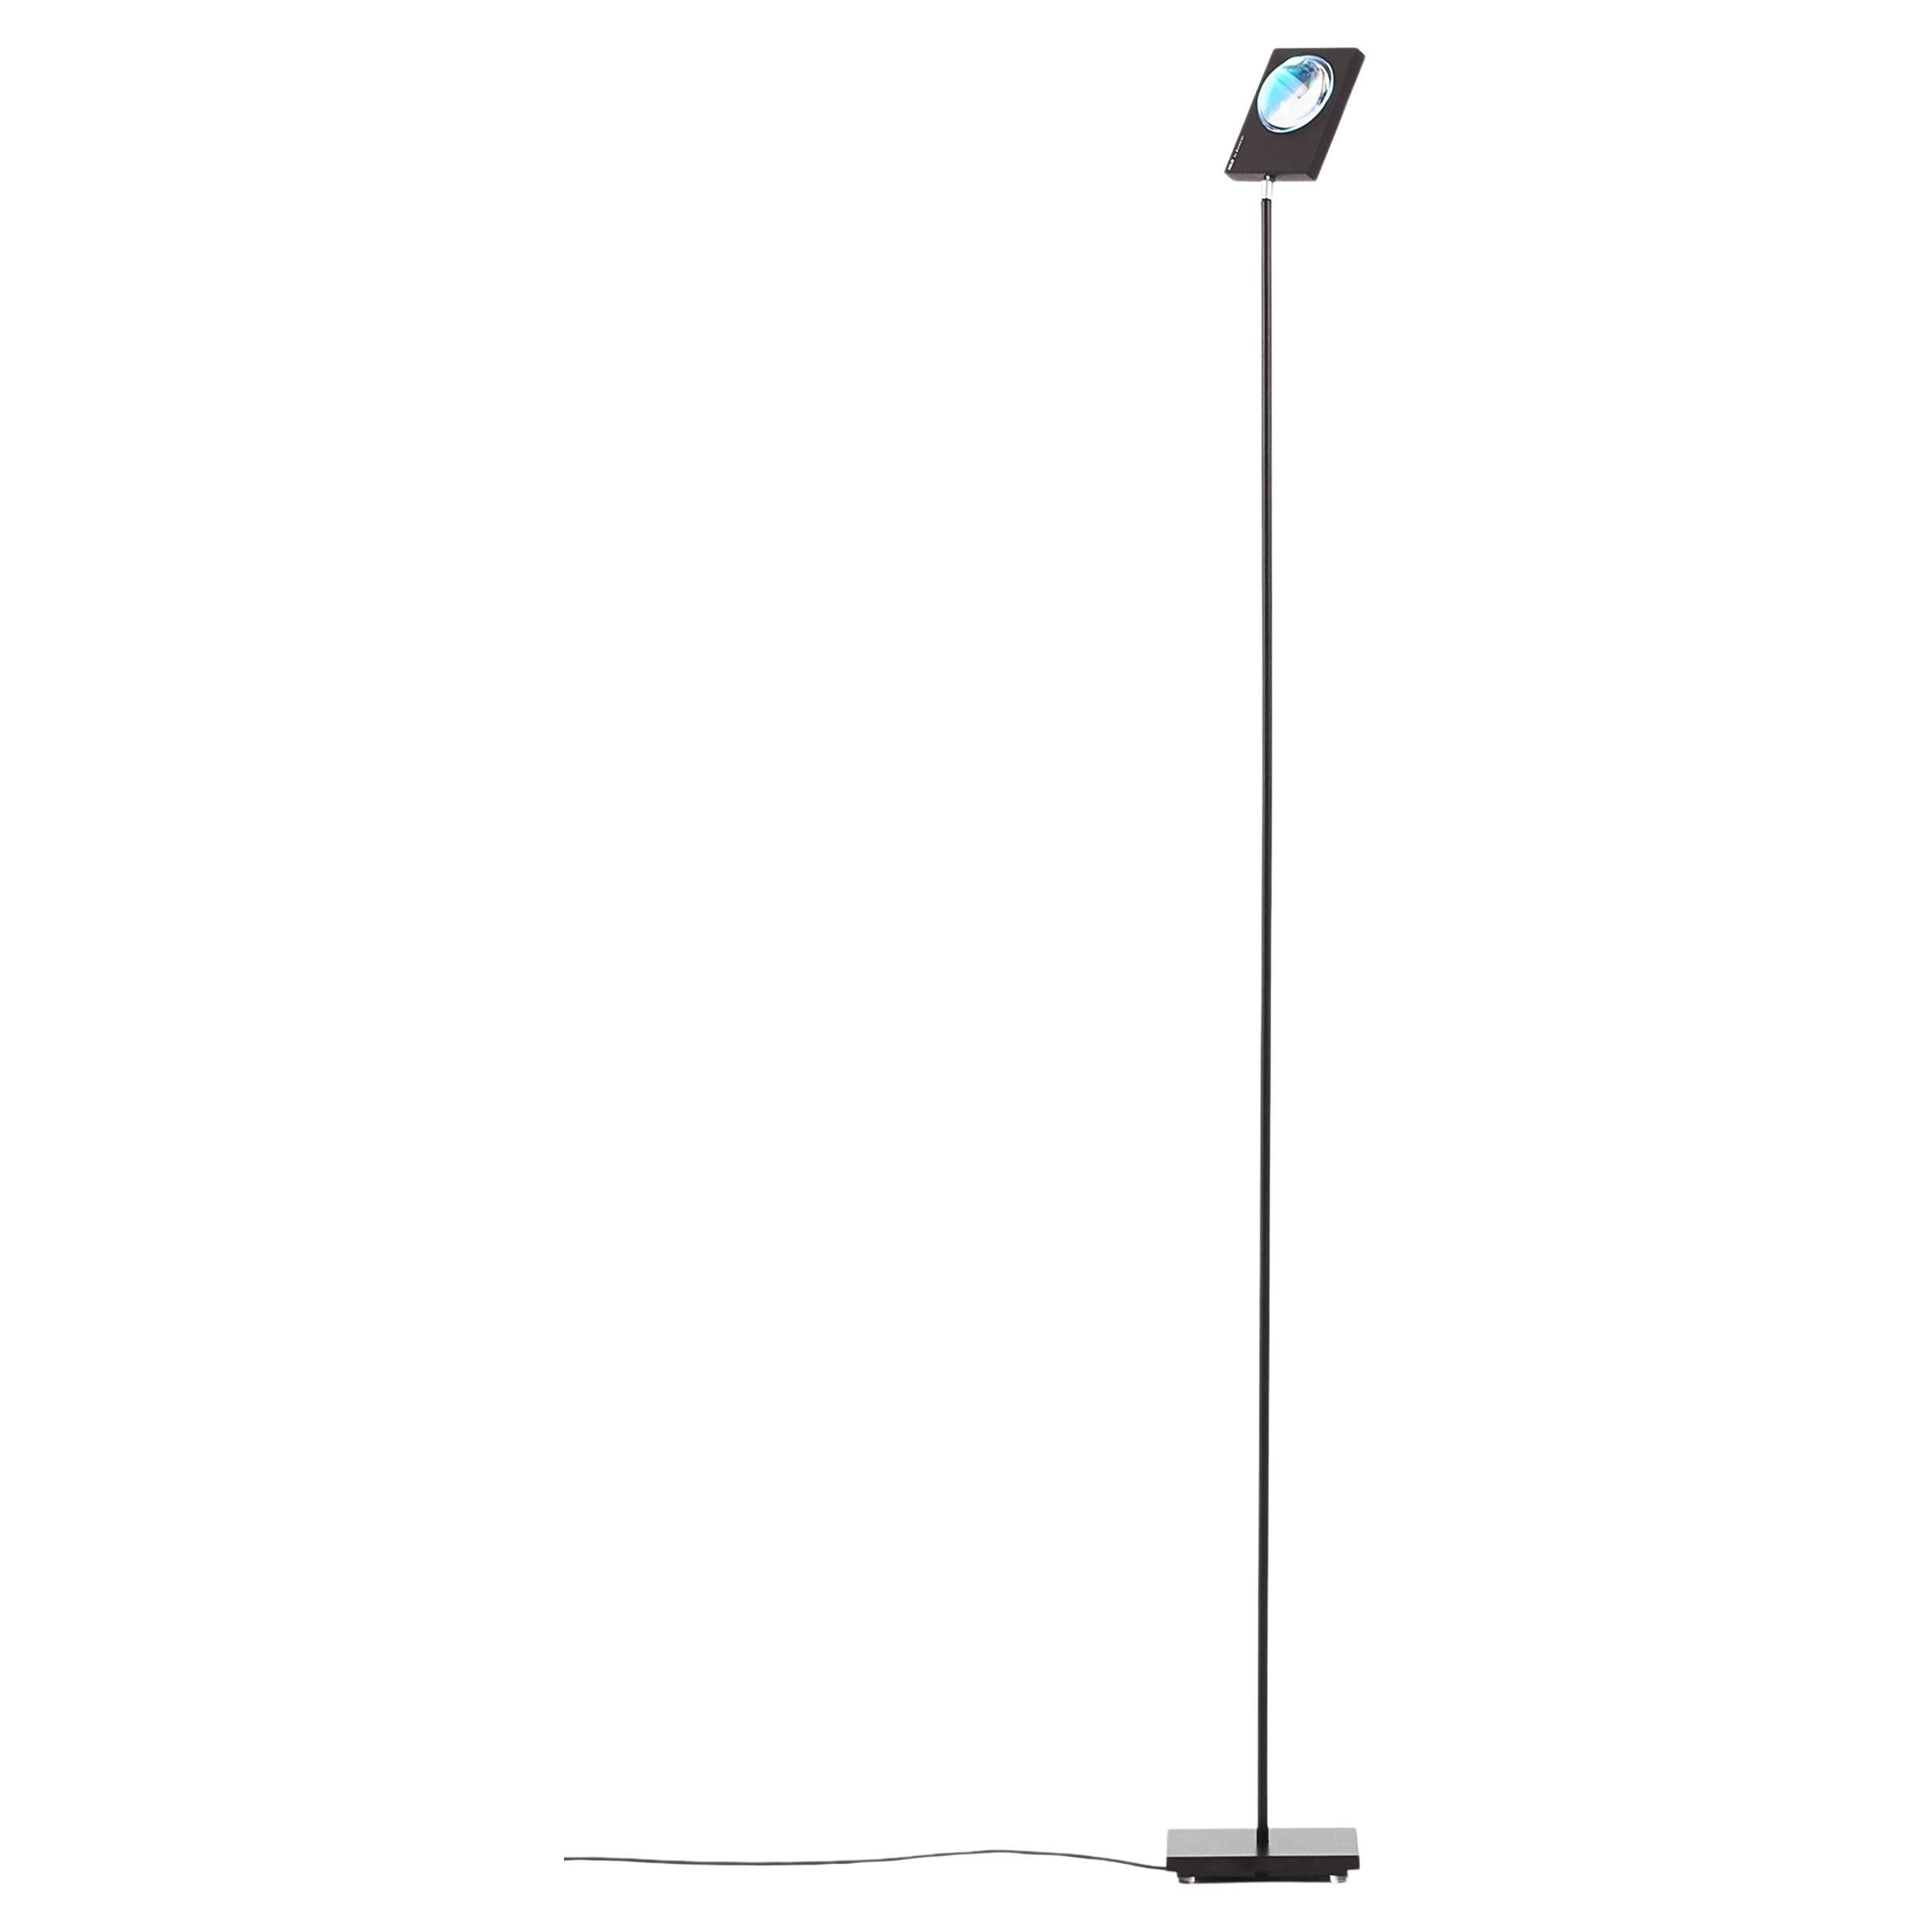 Deep Blue Halo Evo II floor lamp by Mandalaki
Dimensions: D 10 x W 13 x H 120 cm
Materials: Aluminum, brass, iron, glass
Available in other light color,

Weight: 3 Kg
Input: 100-240V 50-60Hz
Output: 12V
LED Power: 8W
Lumen: ~ 1000